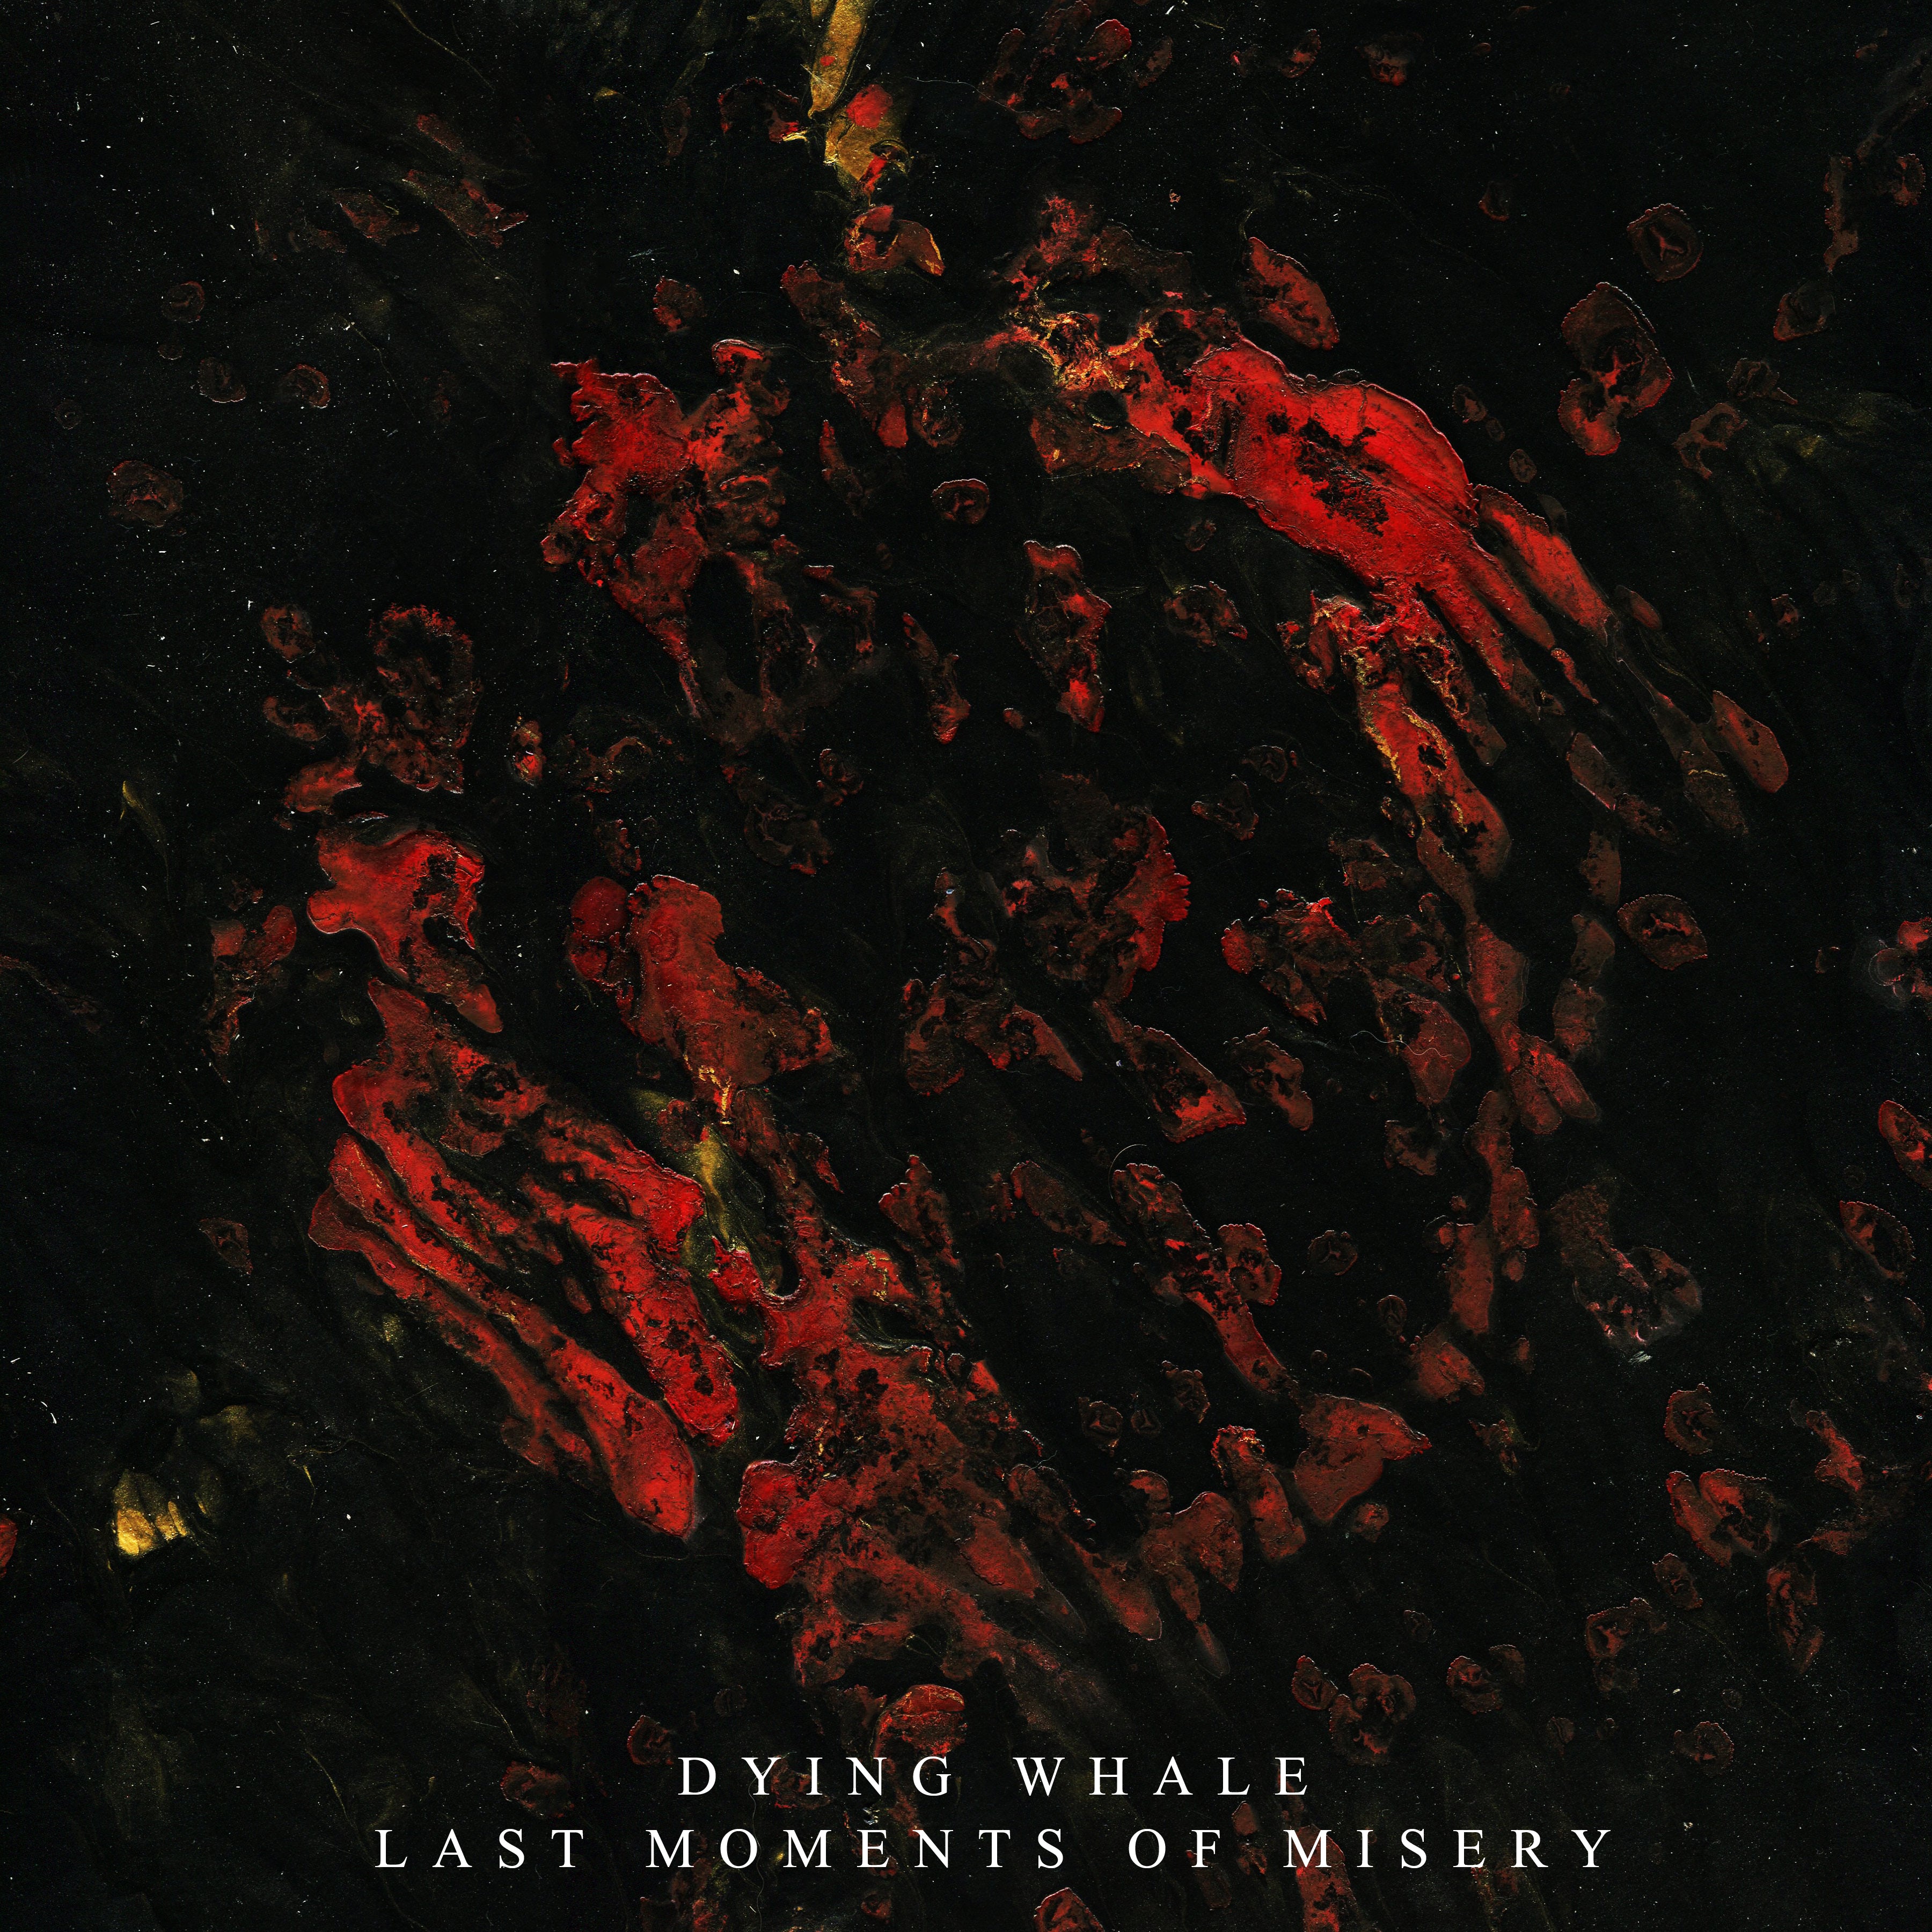 DYING WHALE - Last Moments of Misery